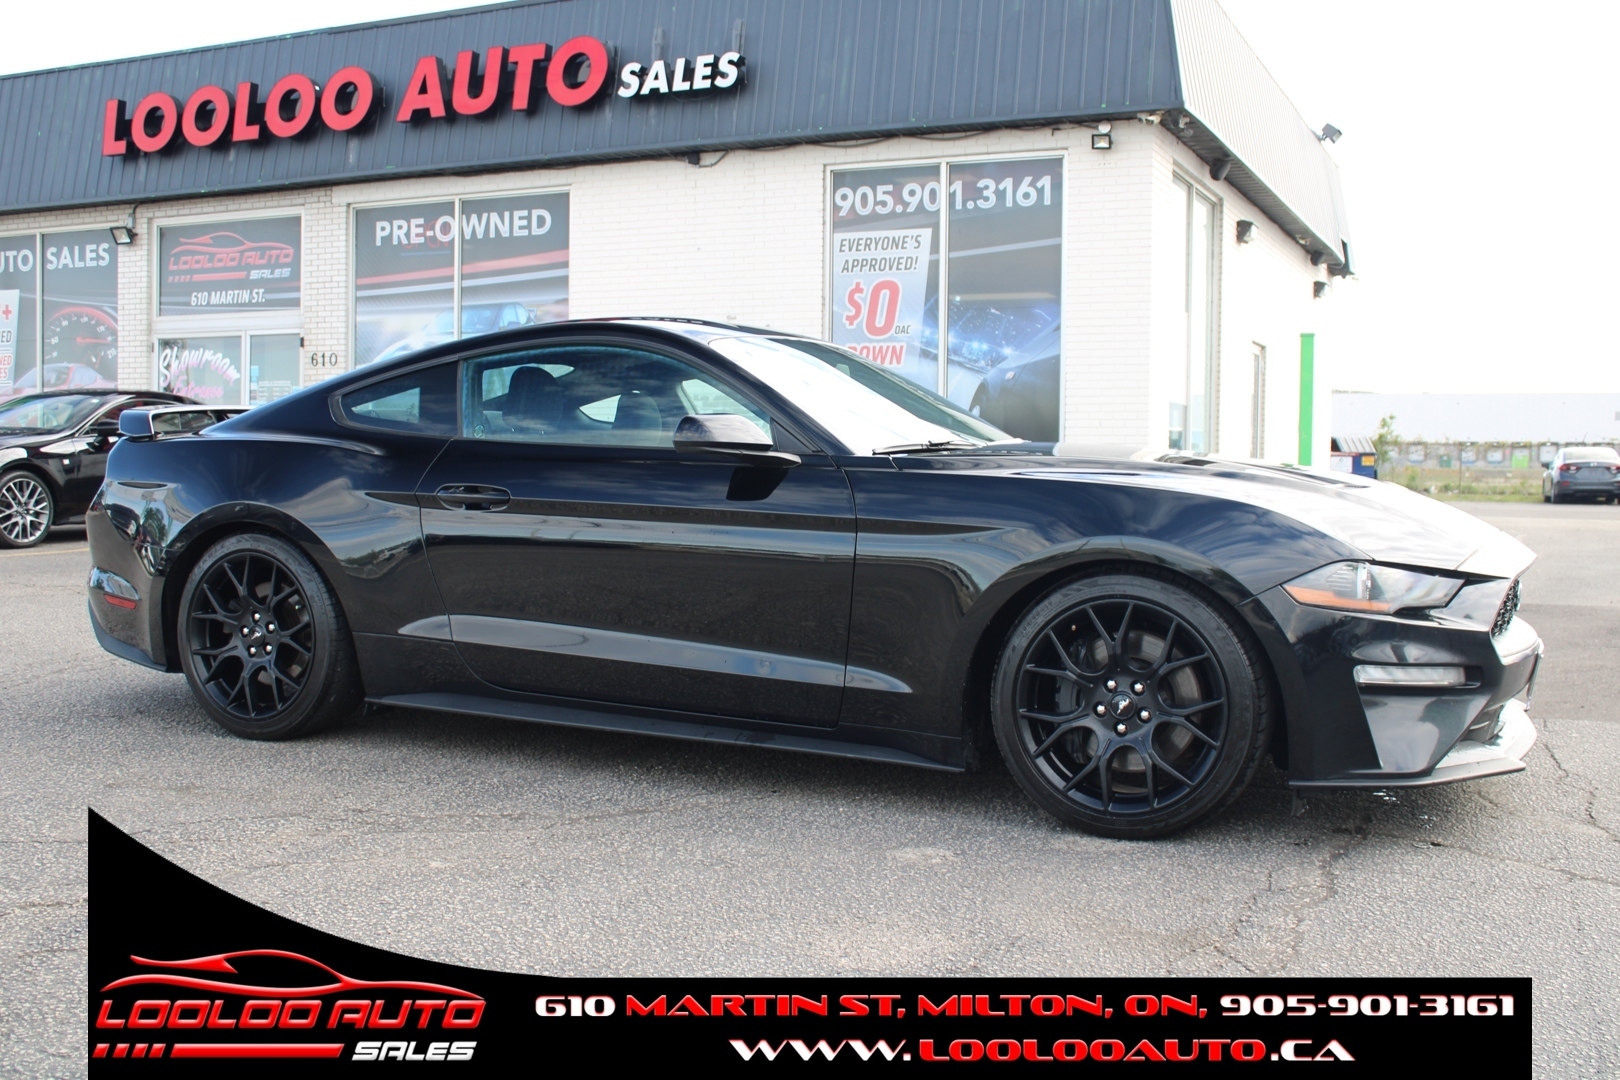 2019 Ford Mustang EcoBoost Coupe 6 Speed Manual $99/Weekly Certified